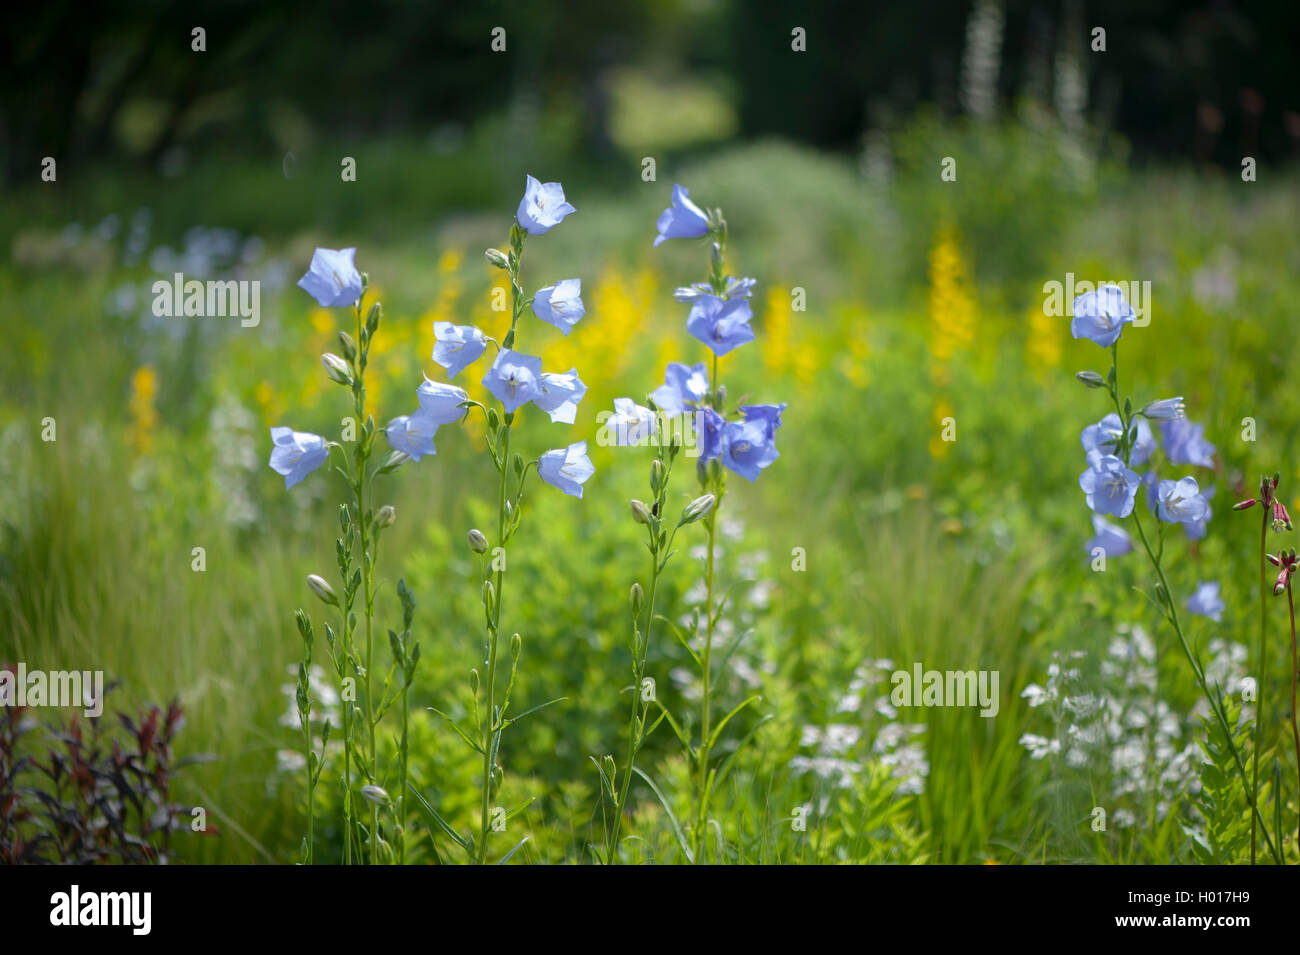 peach-leaved bellflower (Campanula persicifolia), blooming in a meadow, Germany Stock Photo